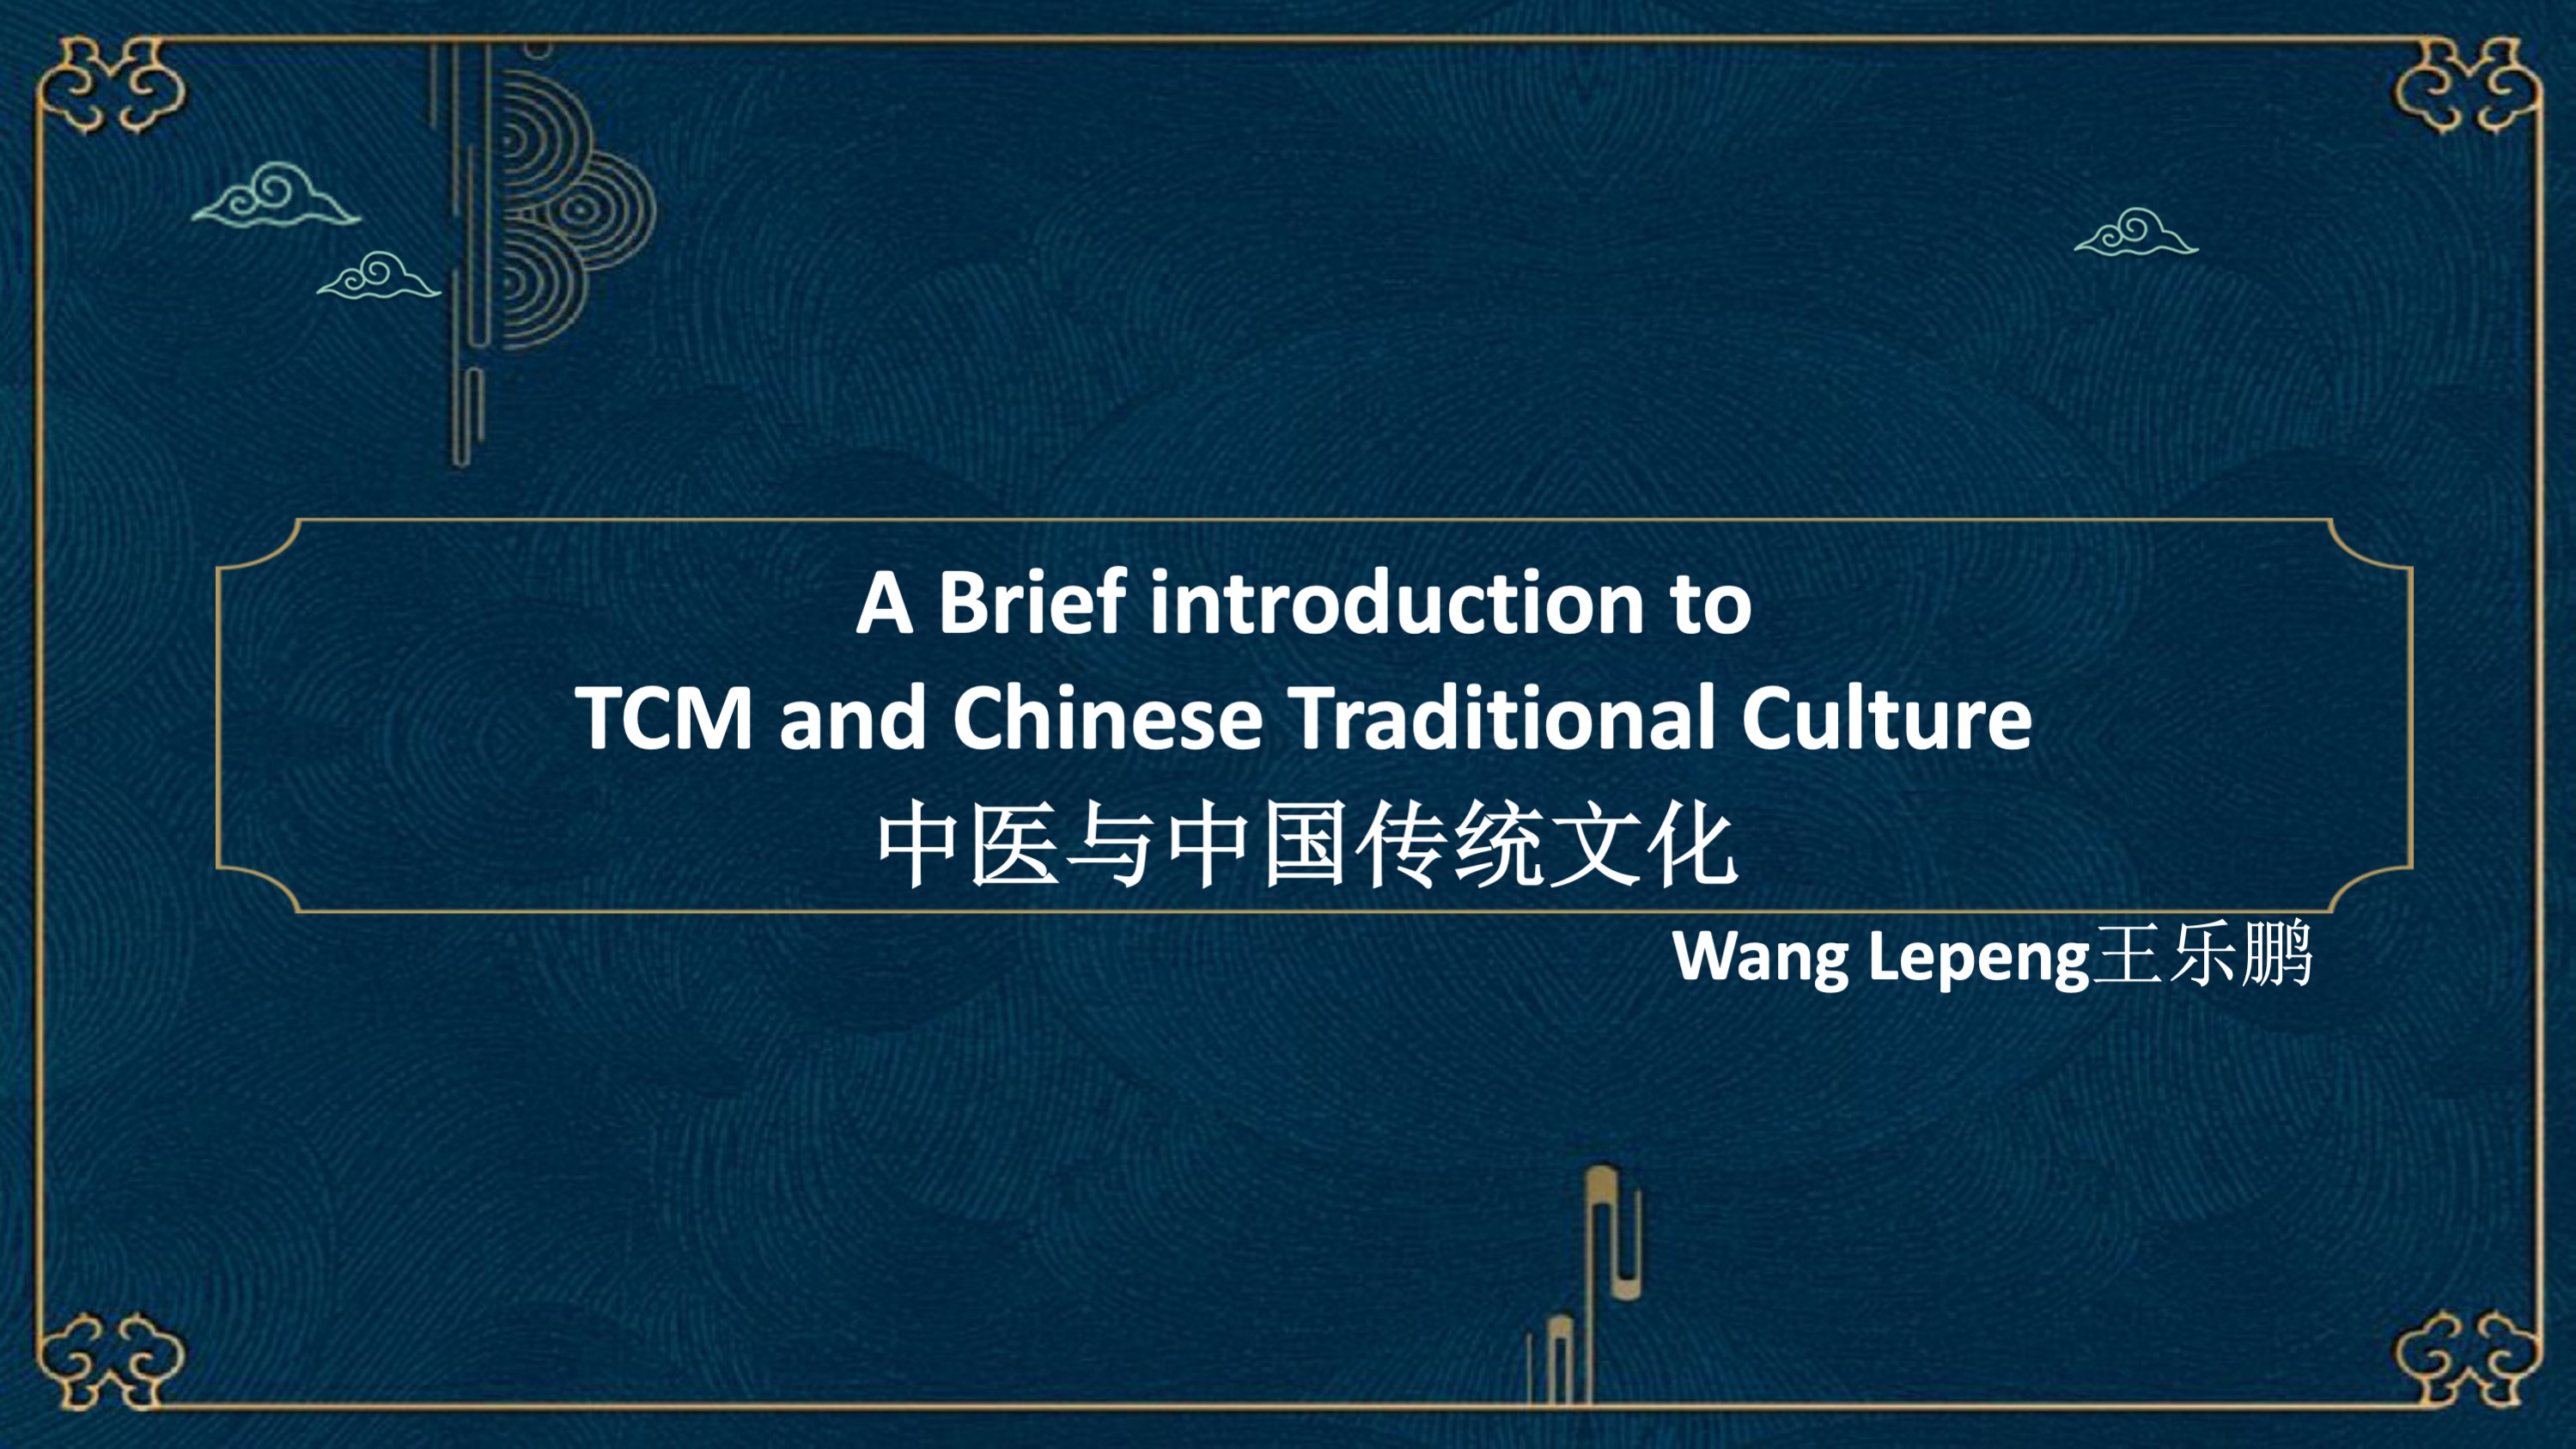 A Brief introduction to TCM and Chinese Traditional Culture